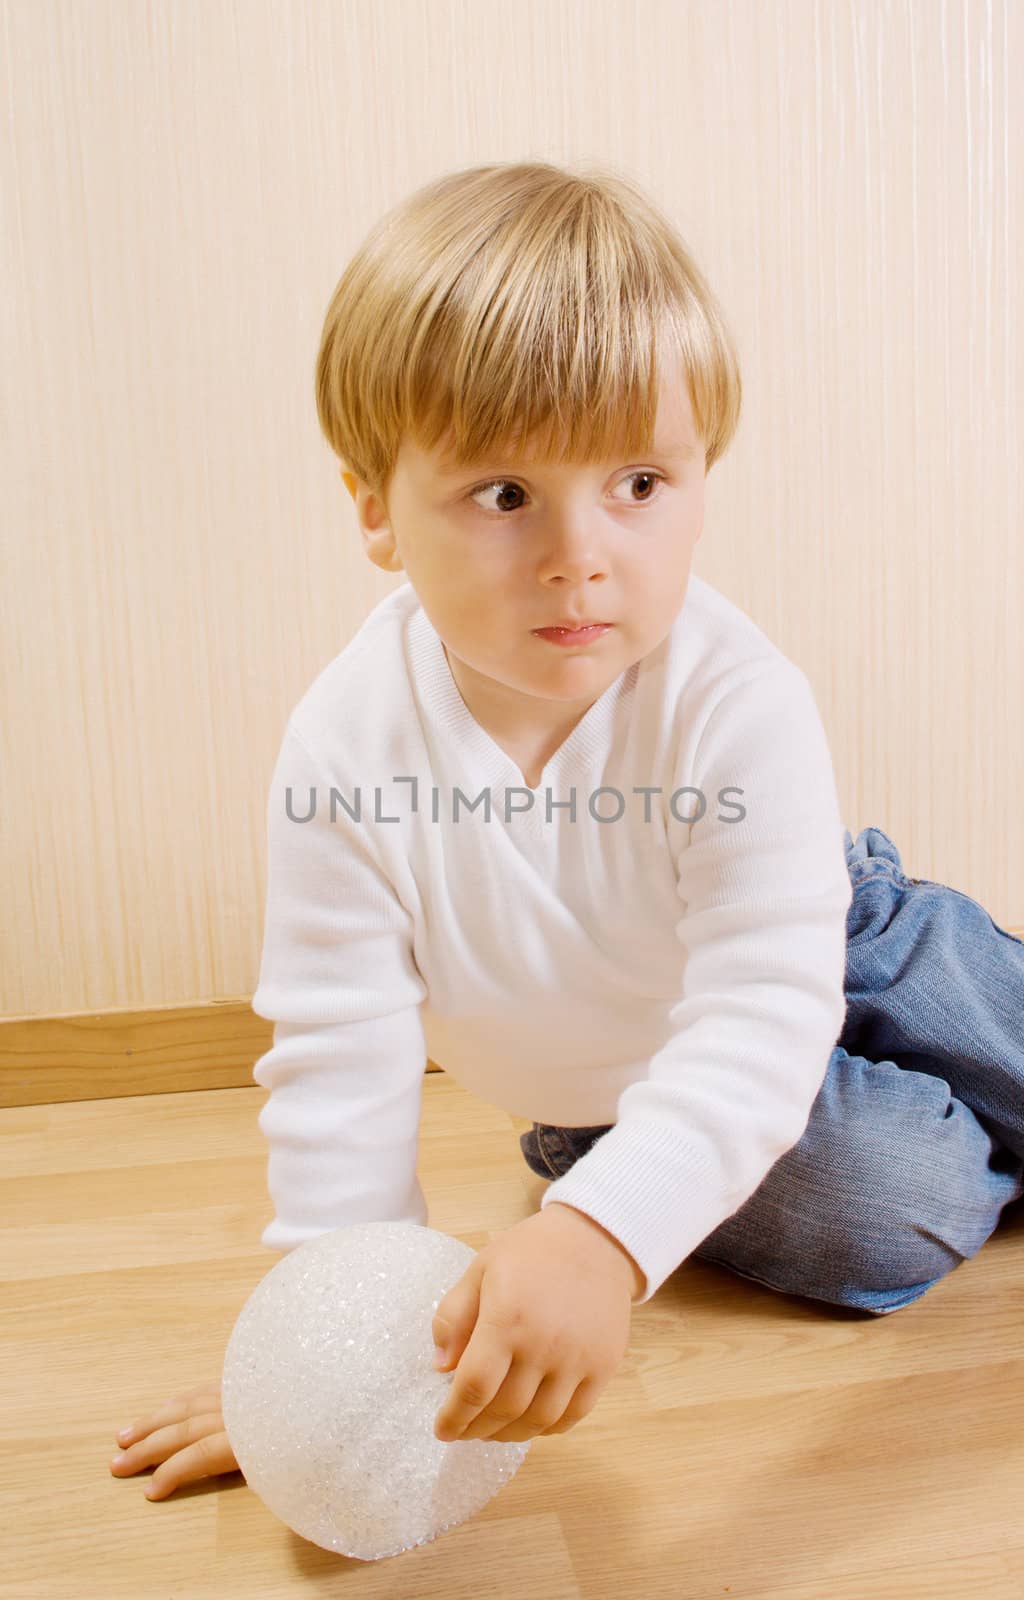 The child on the wood floor with white ball